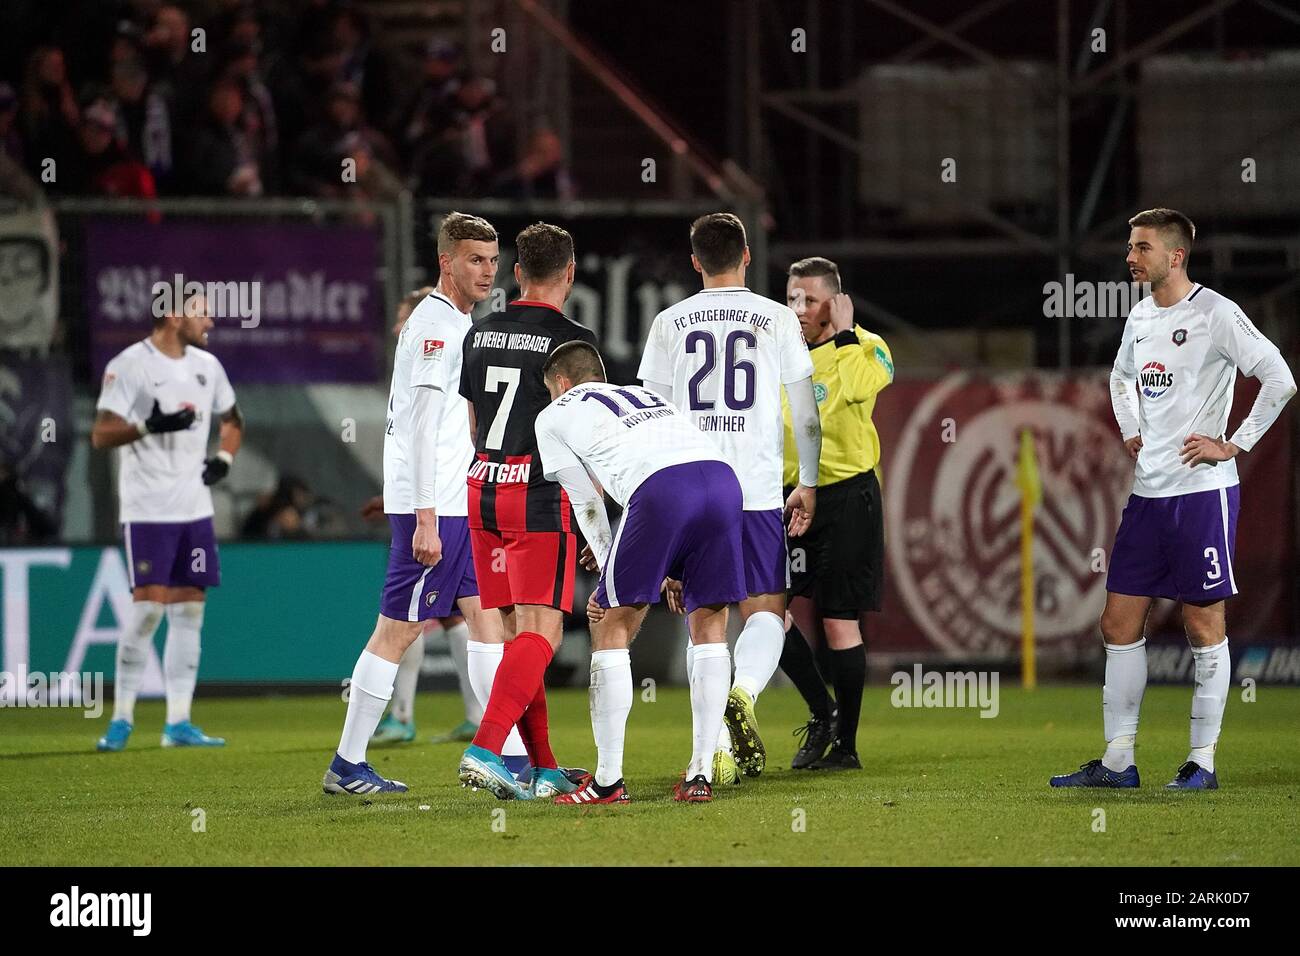 Wiesbaden, Germany. 28th Jan, 2020. Football: 2nd Bundesliga, SV Wehen Wiesbaden - Erzgebirge Aue, 19th matchday. The players from Aue are standing on the field after the defeat. Credit: Hasan Bratic/dpa - IMPORTANT NOTE: In accordance with the regulations of the DFL Deutsche Fußball Liga and the DFB Deutscher Fußball-Bund, it is prohibited to exploit or have exploited in the stadium and/or from the game taken photographs in the form of sequence images and/or video-like photo series./dpa/Alamy Live News Stock Photo